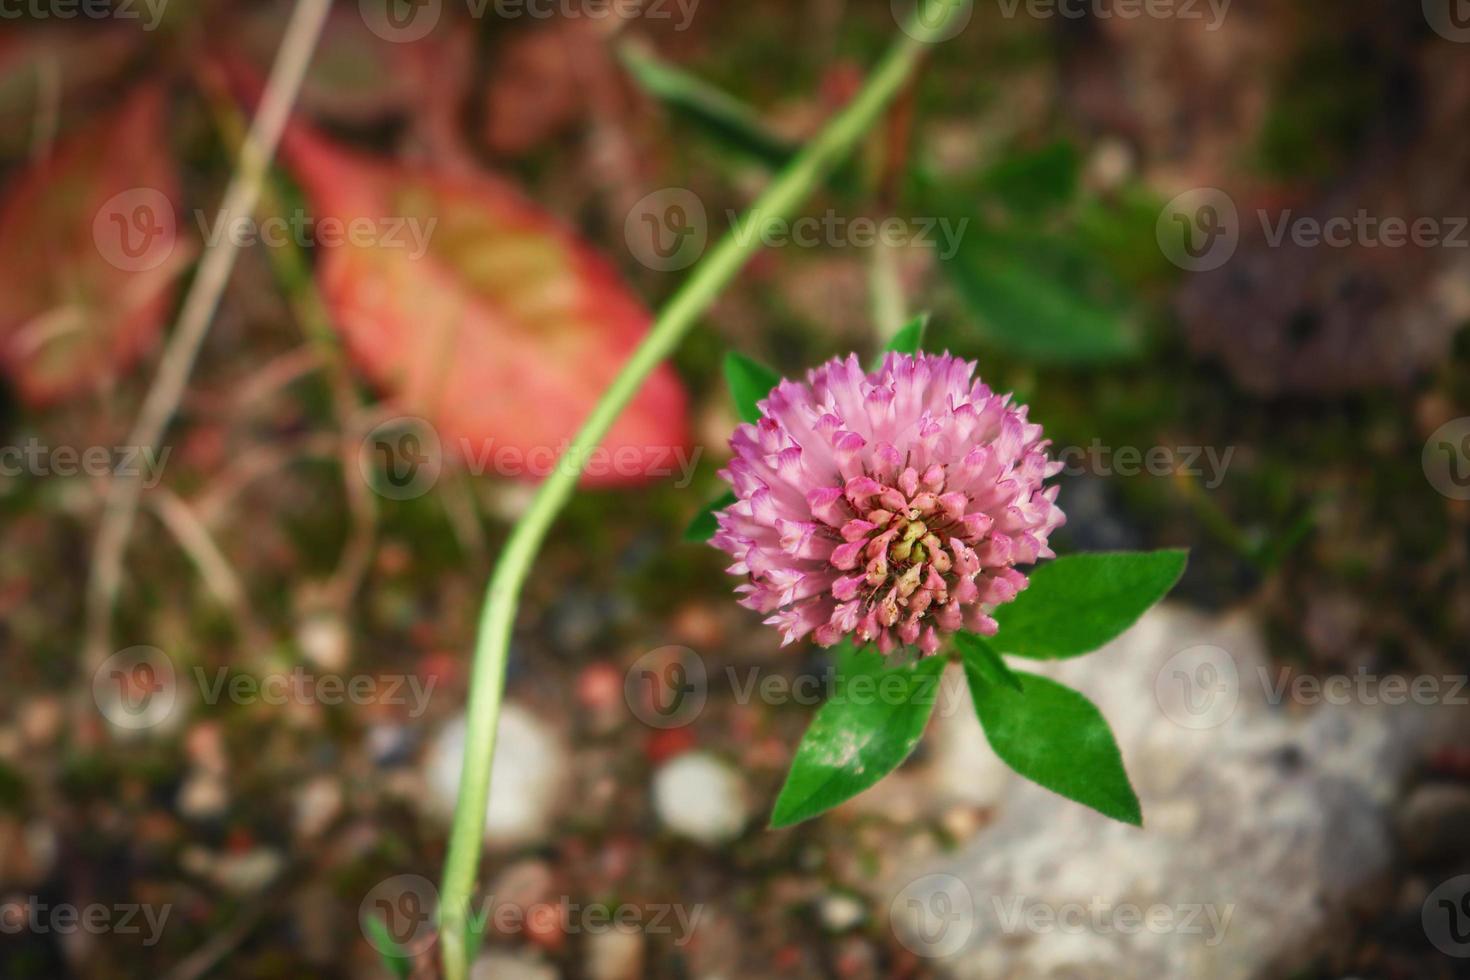 Pink clover flower in bloom on juicy stem with leaves on dry red and brown autumn leaves and stones background photo